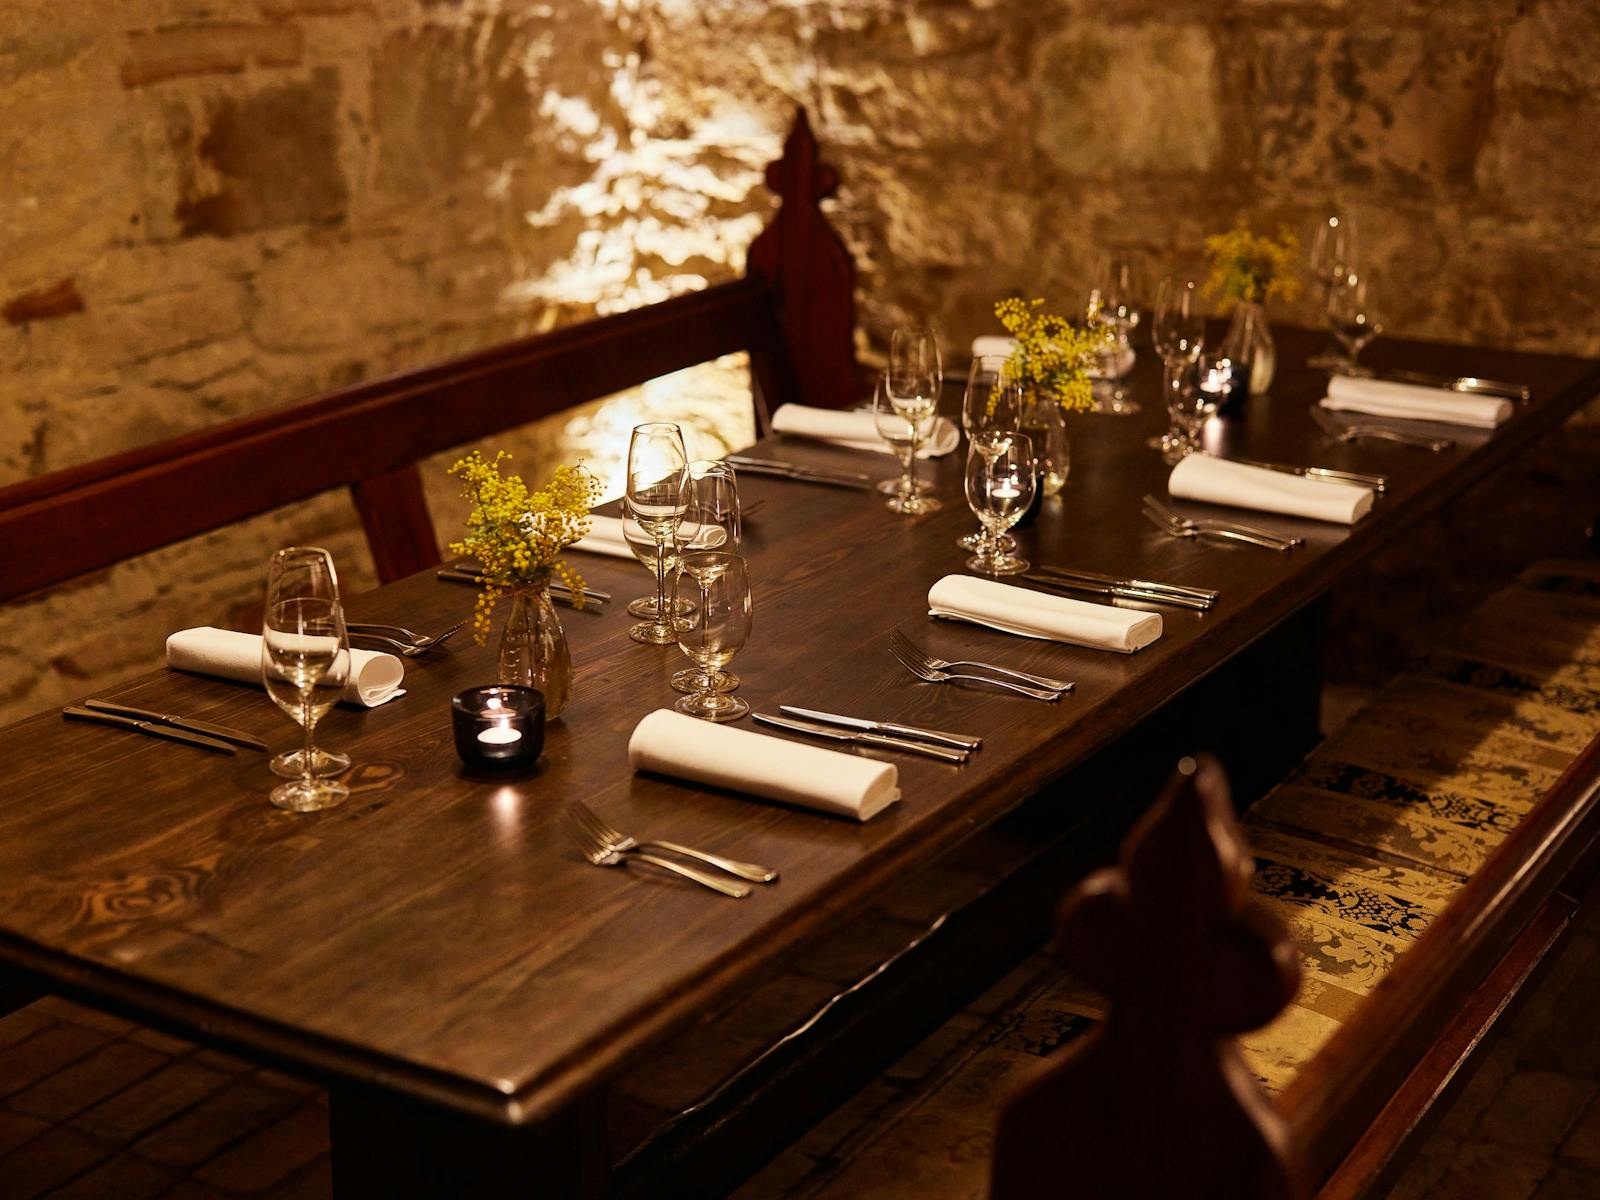 Cellar dining table set for 8 people, dimly lit with candlelight and limestone walls.